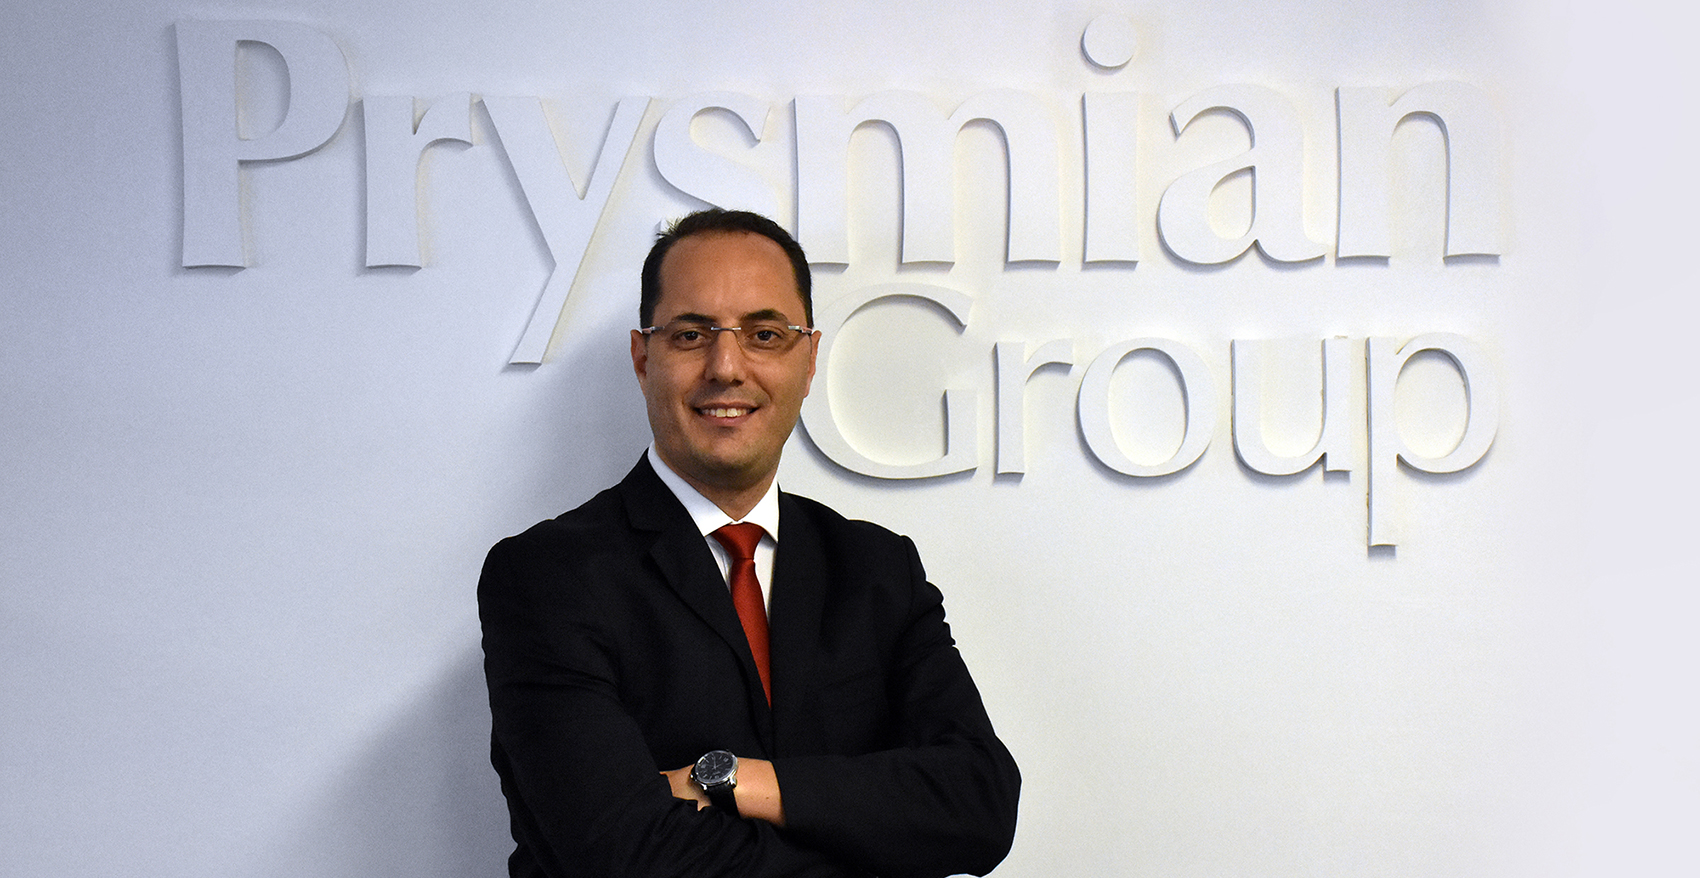 Tamer Yavuztürk is appointed the MEAT Region Marketing and Communication Director of Prysmian Group
